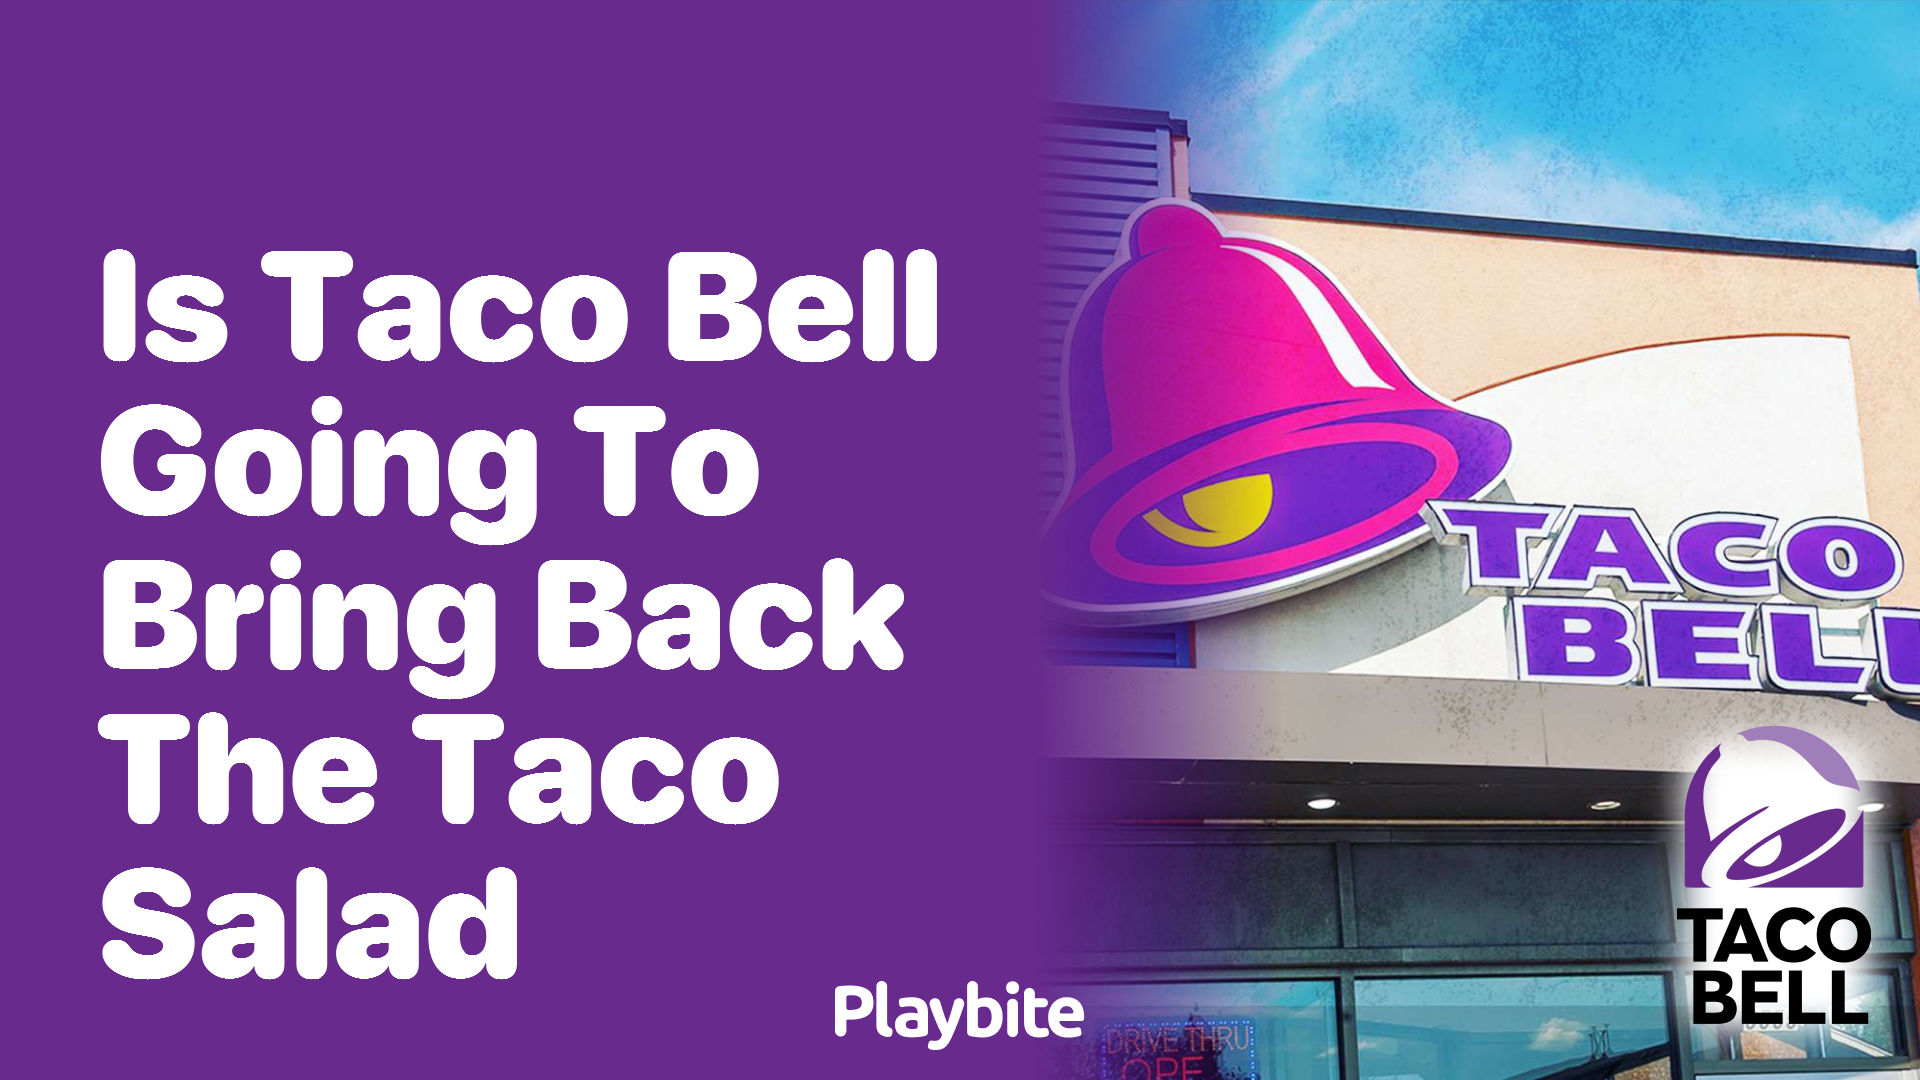 Is Taco Bell Going to Bring Back the Taco Salad?